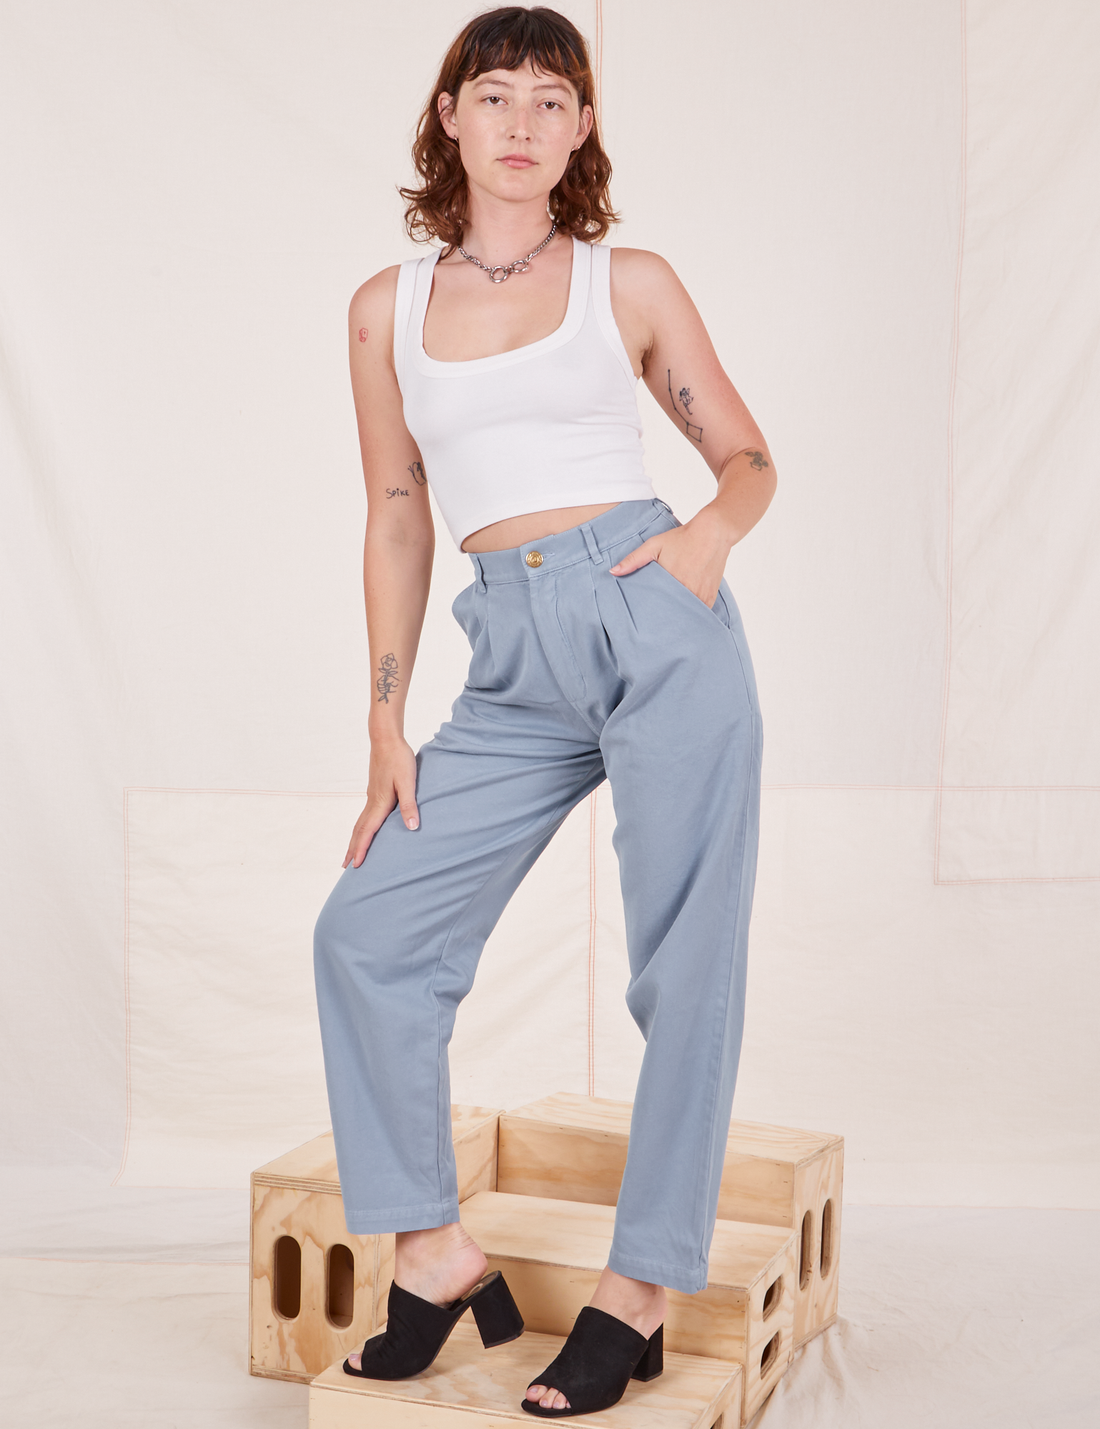 Alex is 5'8" and wearing XXS Organic Trousers in Periwinkle paired with vintage off-white Cropped Tank Top